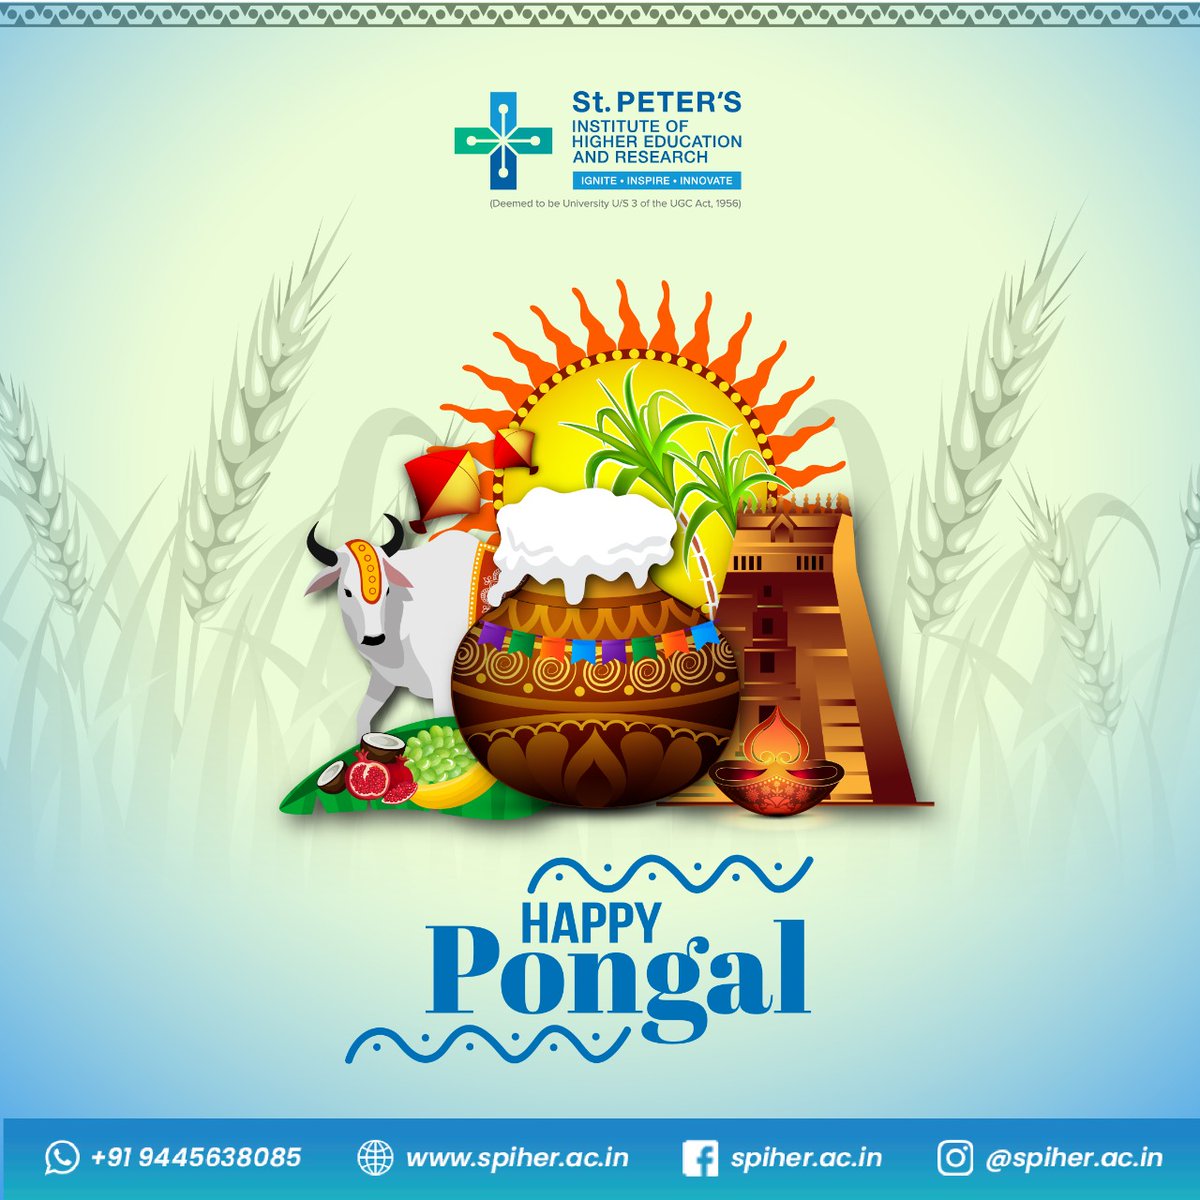 Happy Pongal from #SPIHER to you!✨

May this year be filled with good luck, good health and good times. 
Happy Pongal!

#pongal #pongalopongal #makarsankranti #sankranti #pongalcelebration #farmers #SPCET #University #festival #celebrations #harvestfestival #happiness #Stpeters